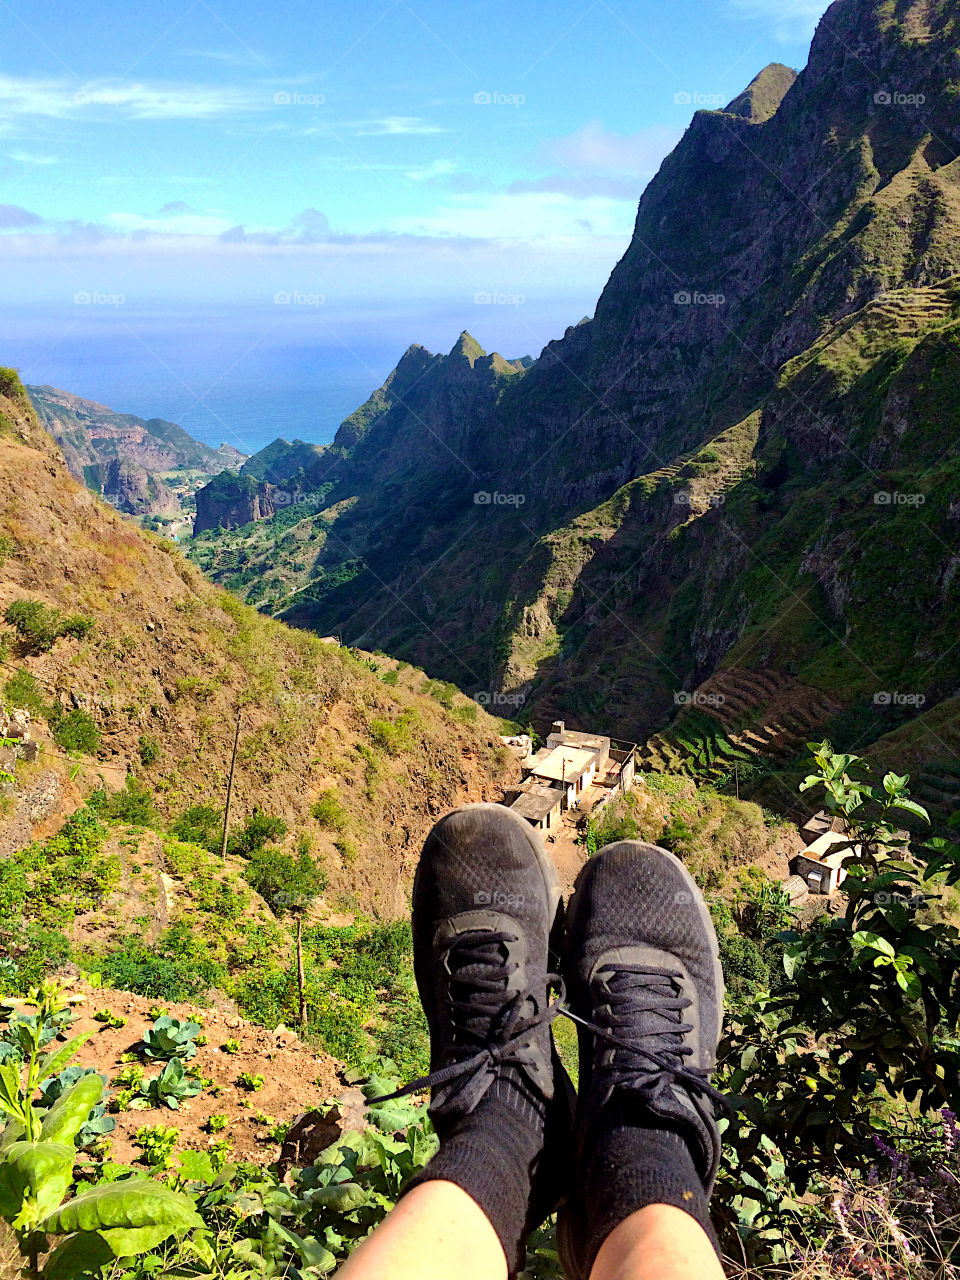 On top of the valley. Paul. Santo Antao. 